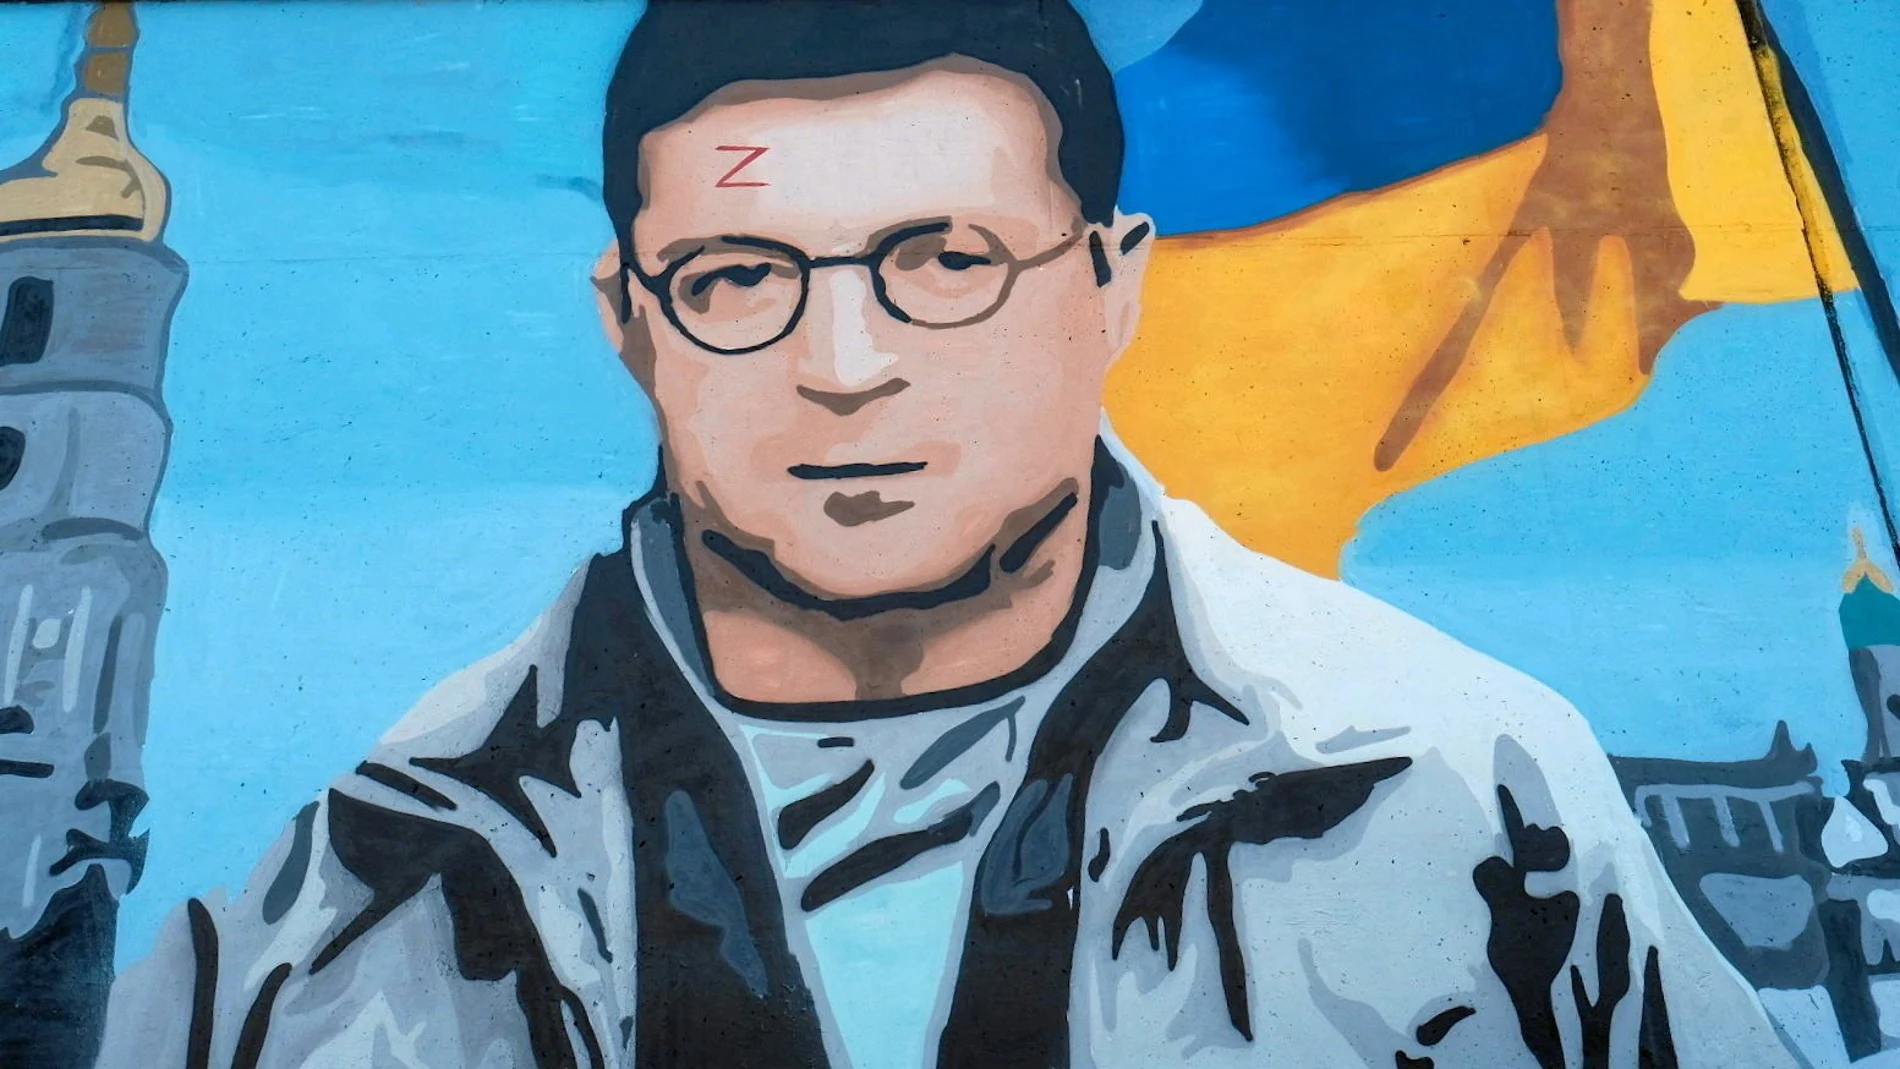 A mural by graffiti artist KAWU depicting Ukrainian President Volodymyr Zelenskiy as Harry Potter with Z on his forehead (instead of lightning bolt) symbolising Russia's invasion of Ukraine is seen in Poznan, Poland March 9, 2022. Piotr Skornicki/Agencja Wyborcza.pl via REUTERS ATTENTION EDITORS - THIS IMAGE WAS PROVIDED BY A THIRD PARTY. POLAND OUT. NO COMMERCIAL OR EDITORIAL SALES IN POLAND. NO RESALES. NO ARCHIVES